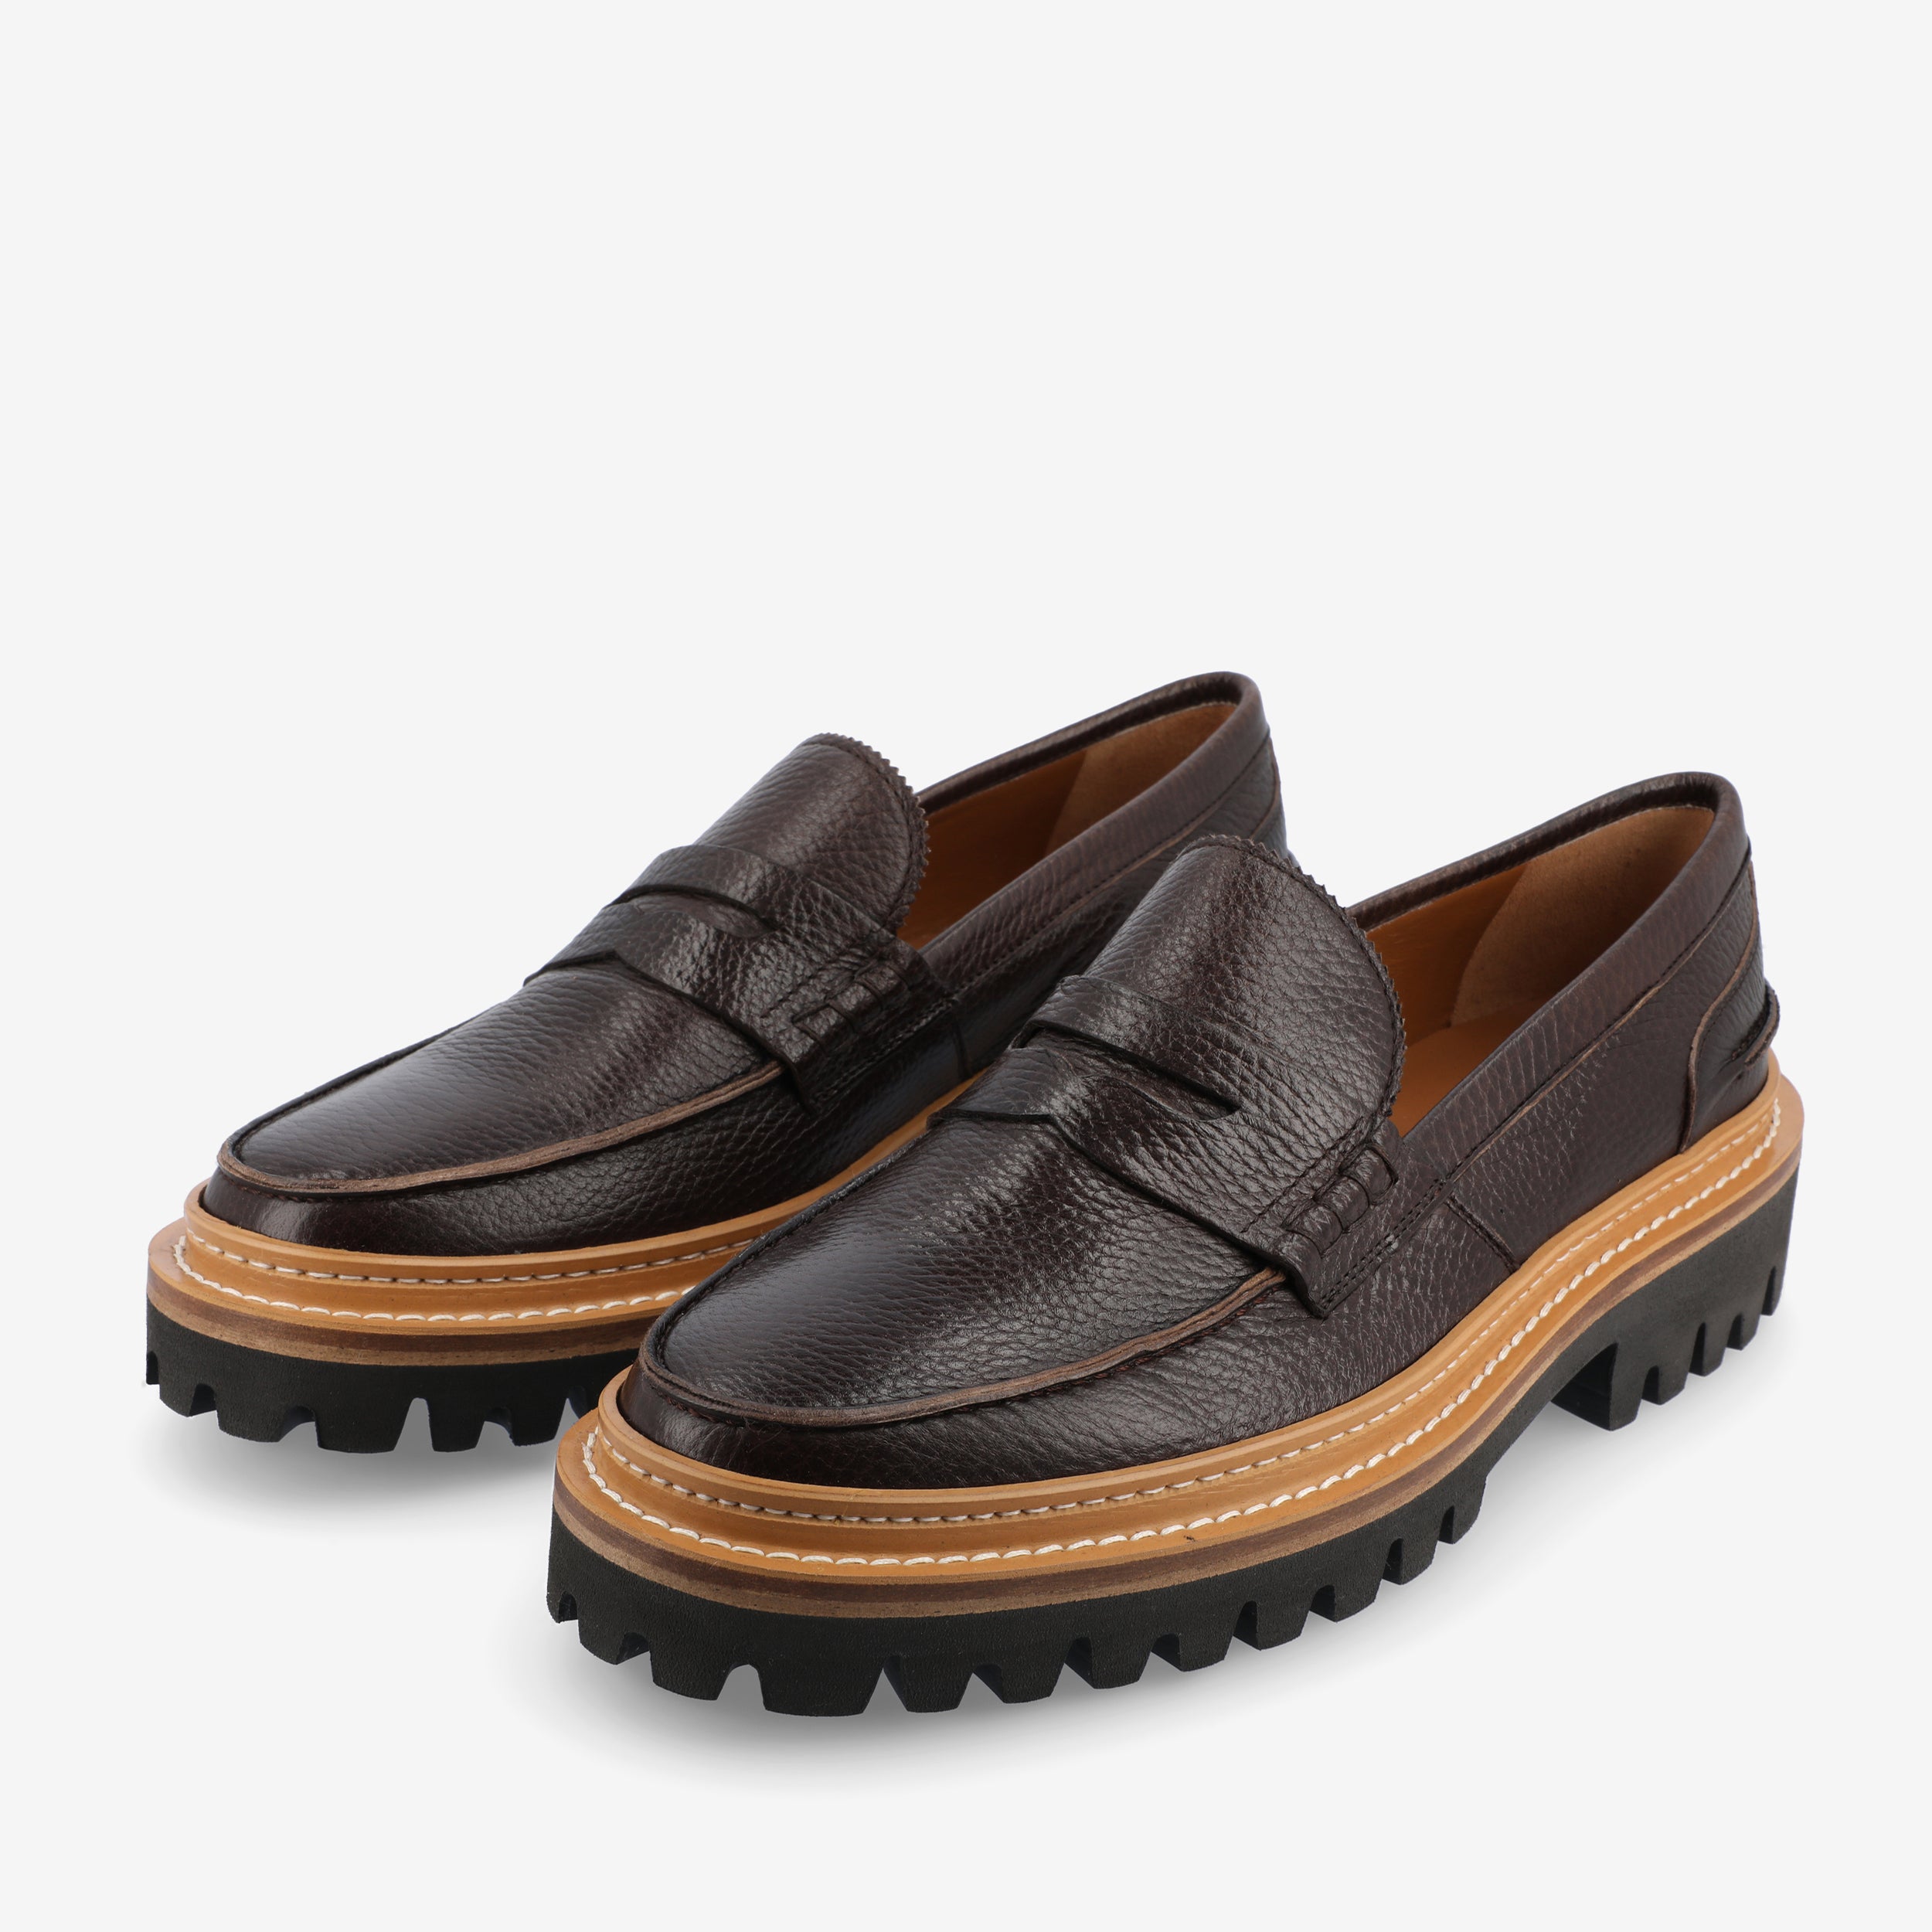 The Country Loafer in Coffee (Last Chance, Final Sale)